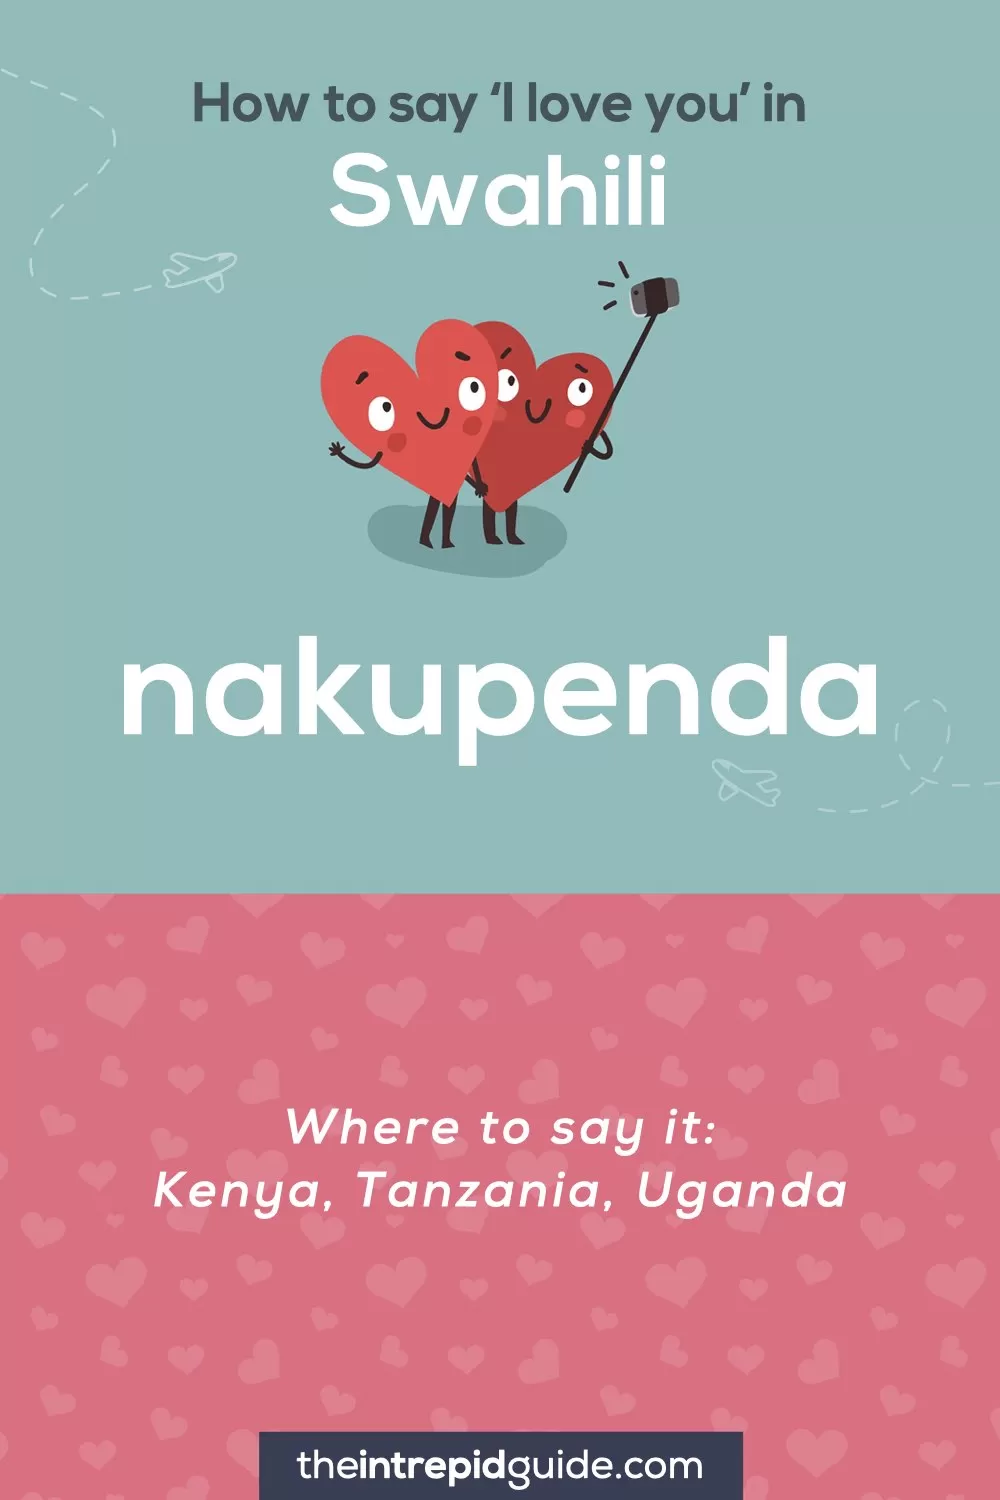 How to say I love you in different languages - Swahili - nakupenda